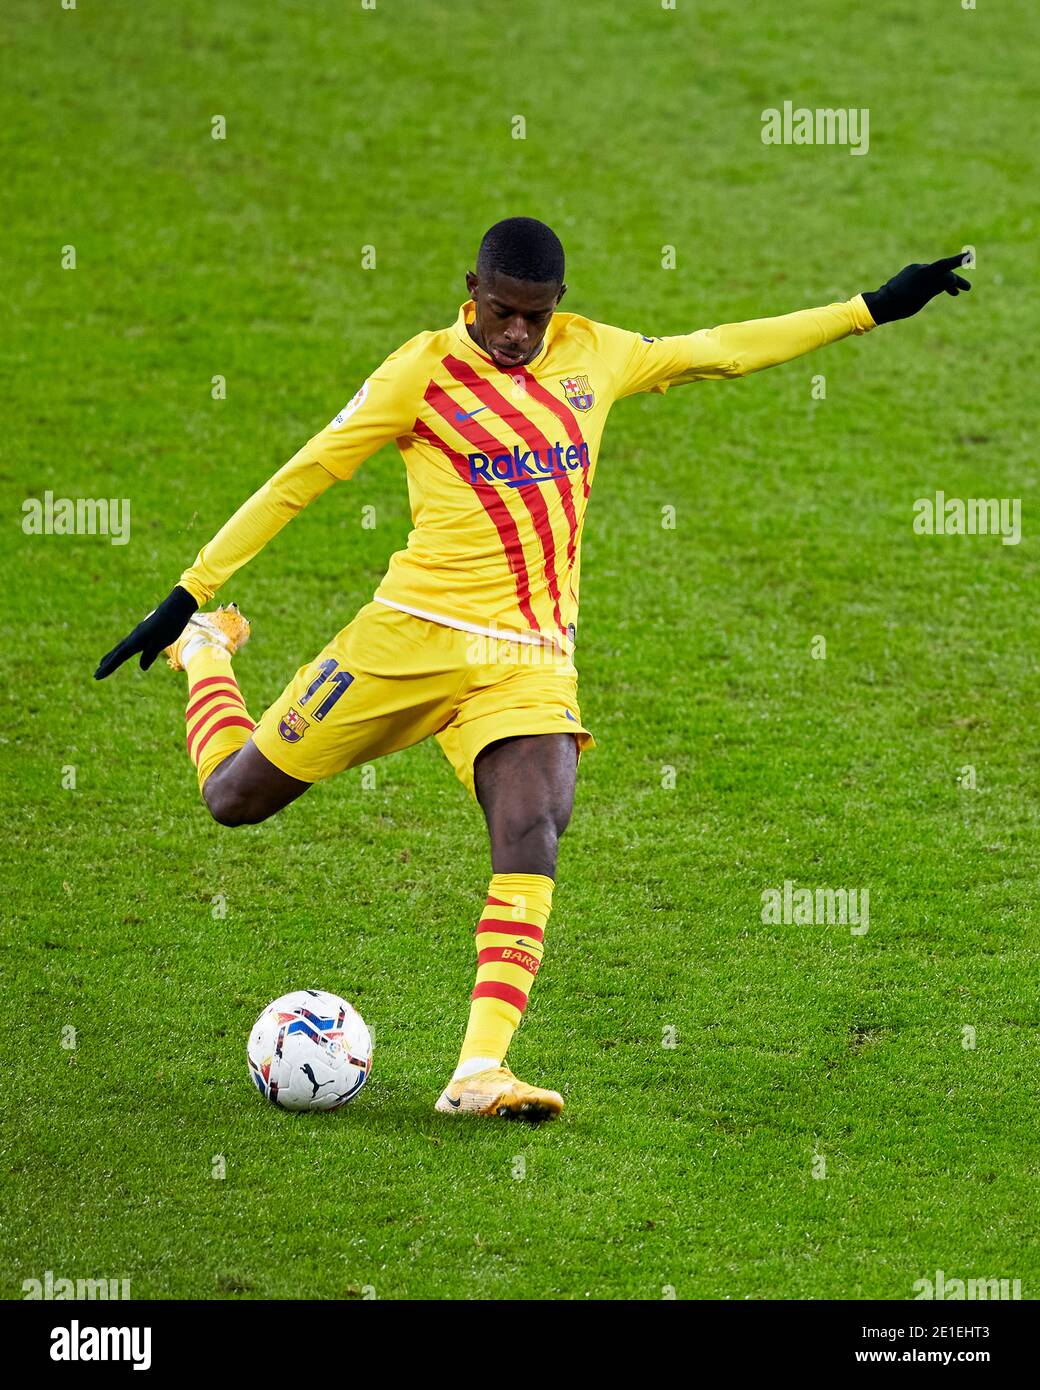 Bilbao, Spain. 06 January, 2021. Ousmane Dembele of FC Barcelona in action during the La Liga match between Athletic Club Bilbao and FC Barcelona played at San Mames Stadium. Credit: Ion Alcoba/Capturasport/Alamy Live News Stock Photo